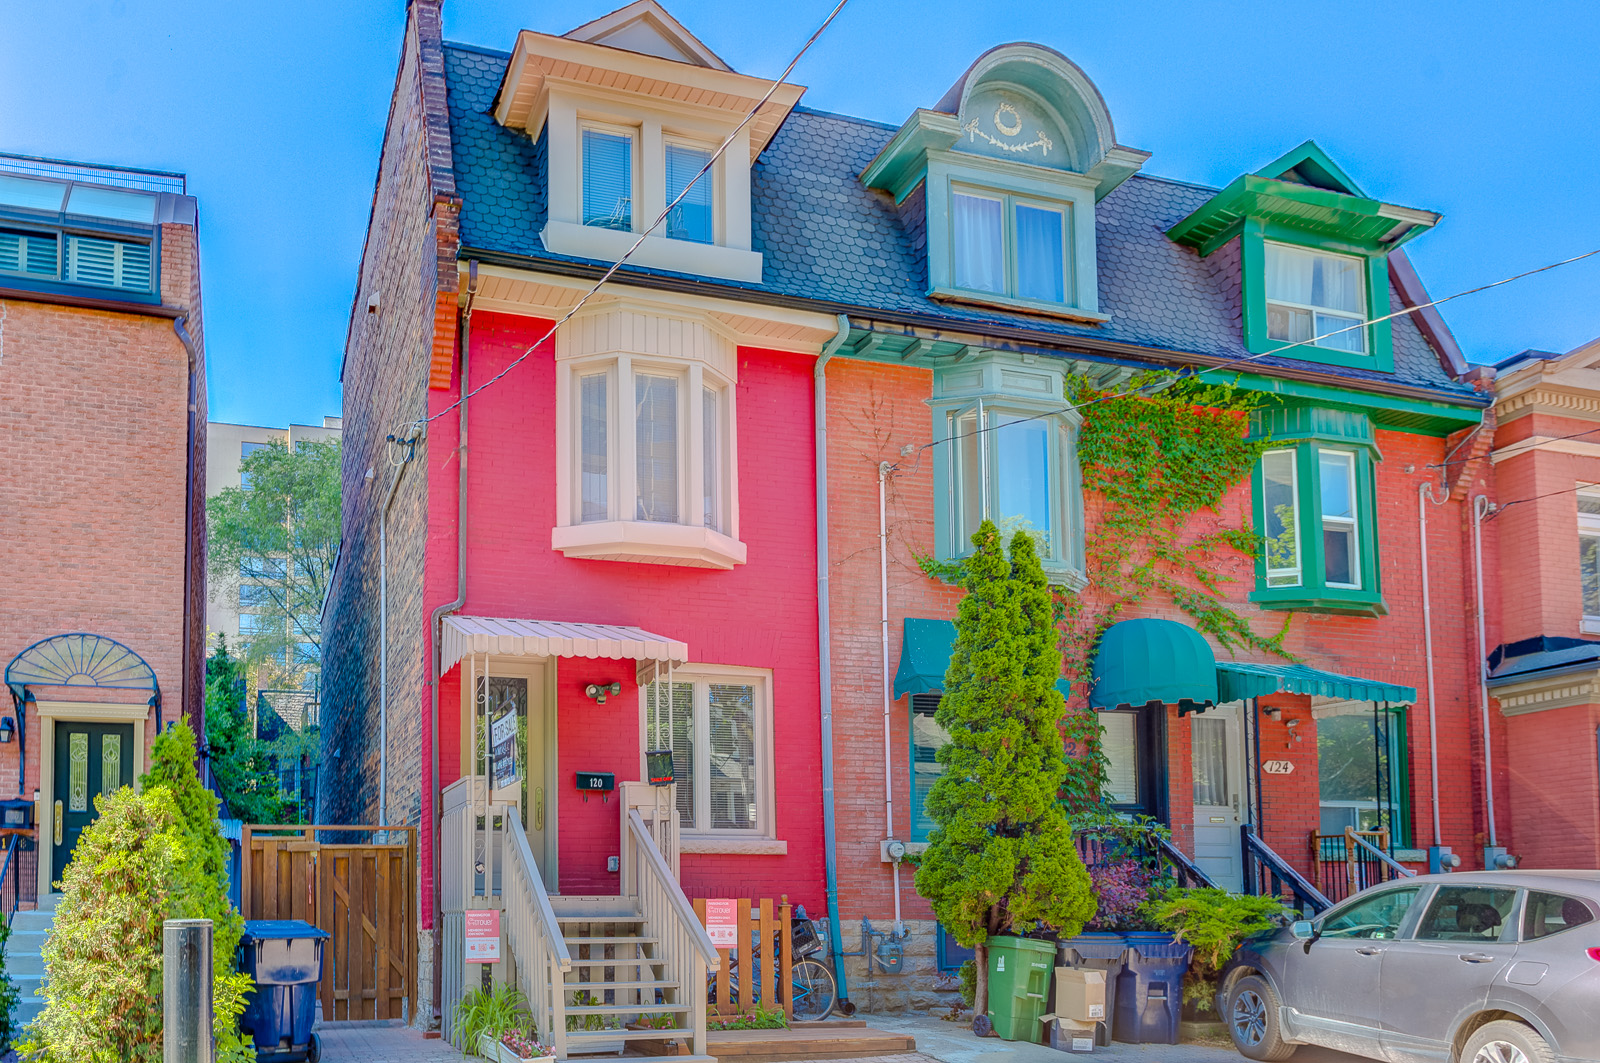 Row of colourful 3-storey Victorian houses in Toronto.